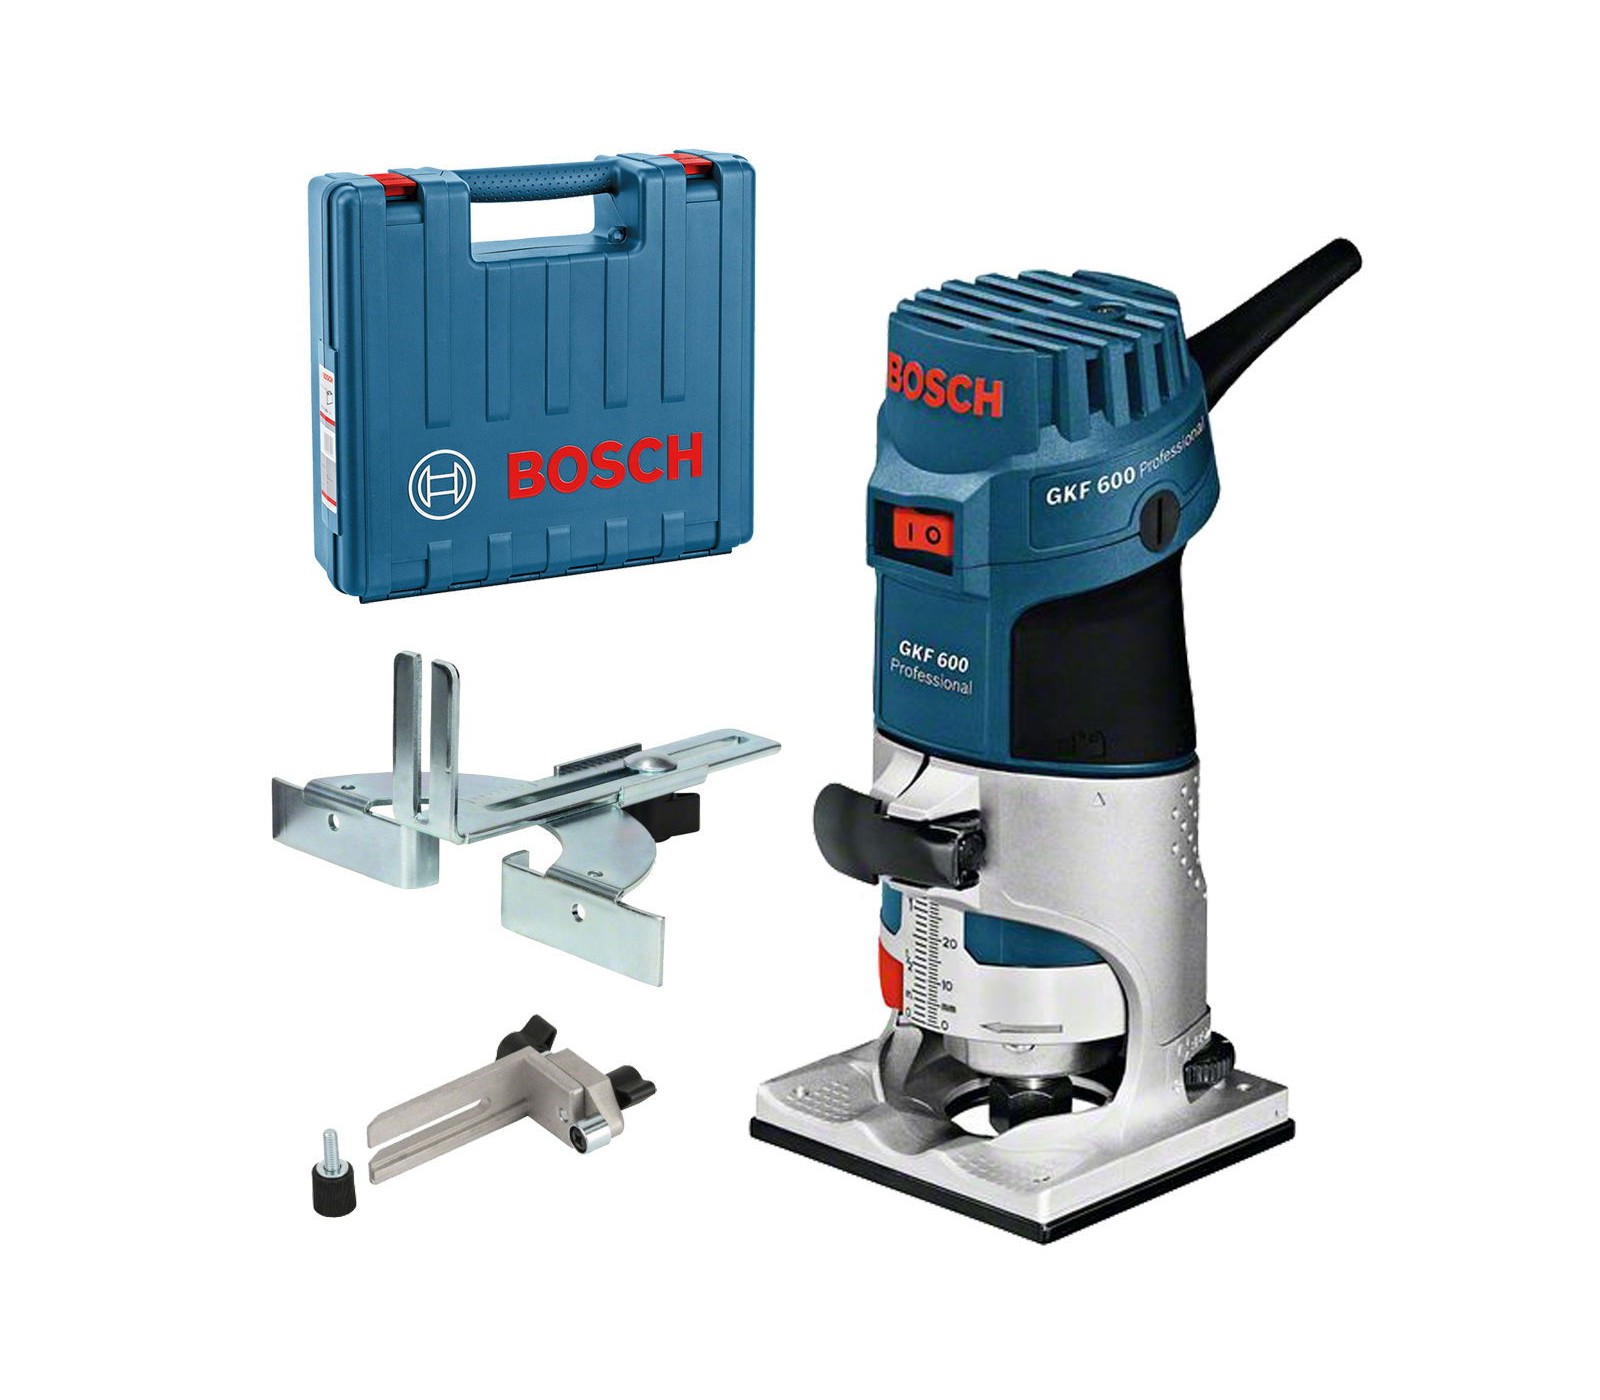 Affleureuse BOSCH GKF600 - LAMINATE TRIMMER - Clicpublic.be, online  auctions in 1 click.